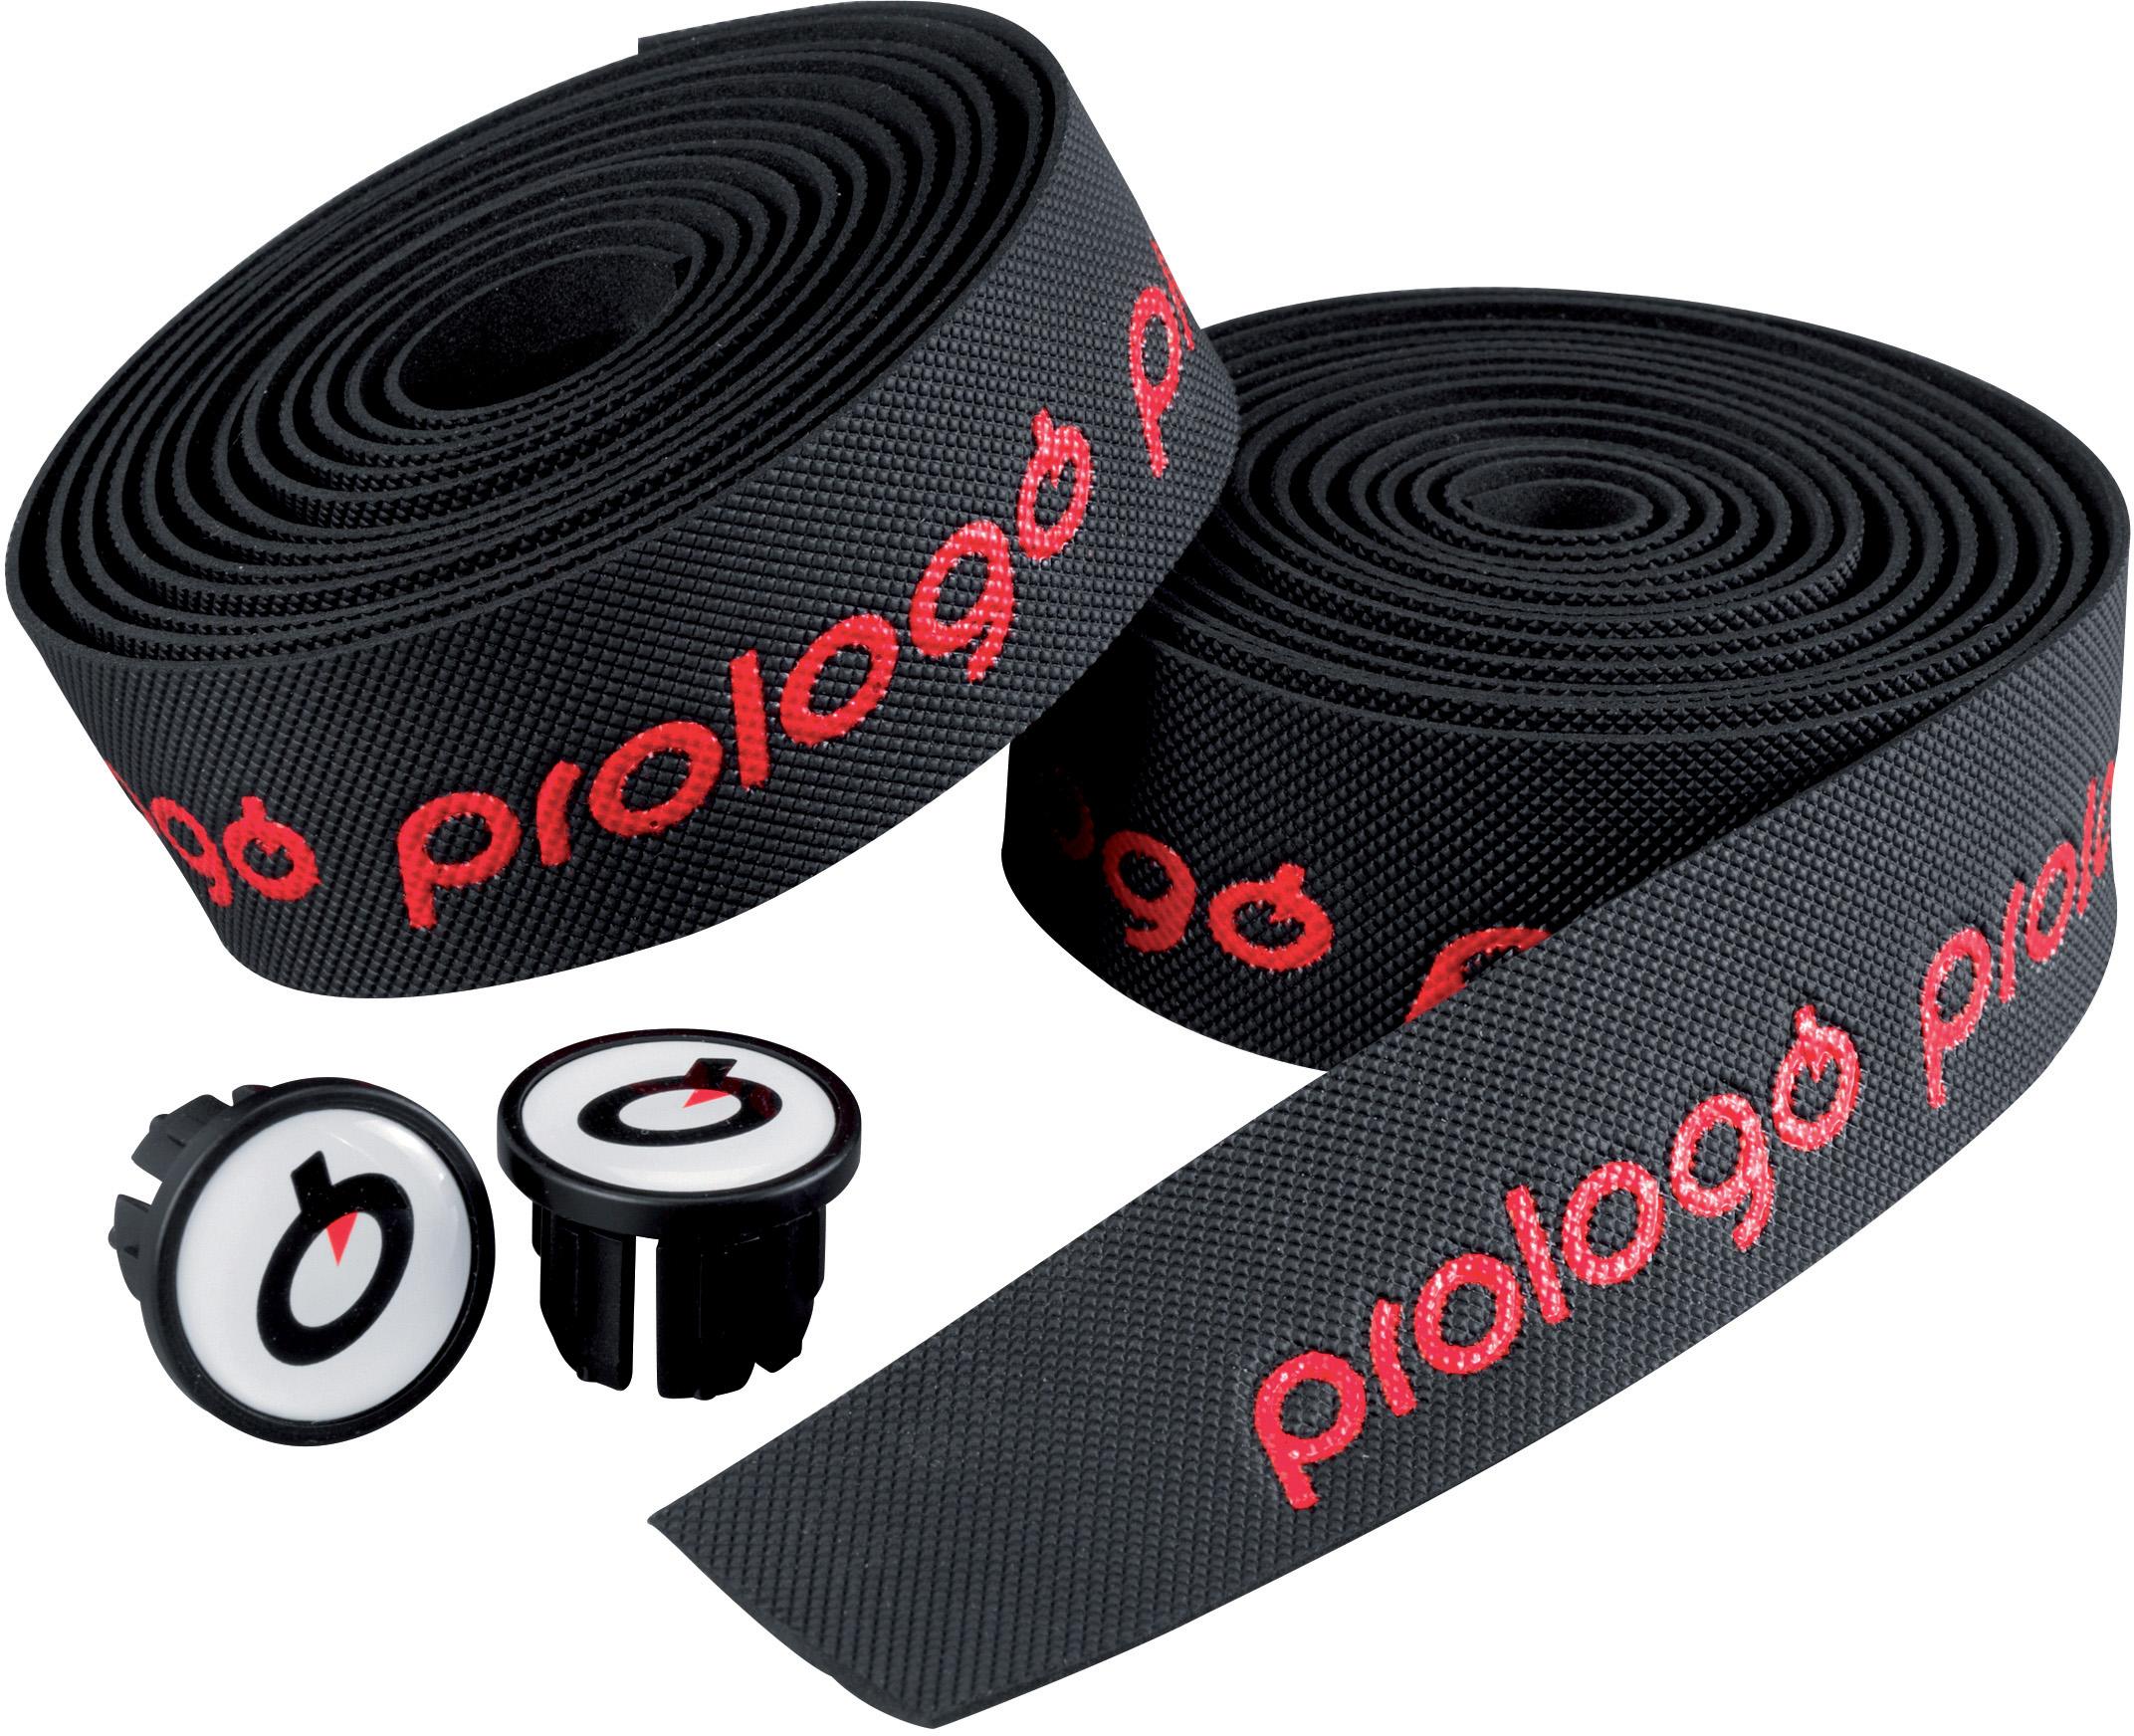 Prologo Onetouch Bar Tape - Black/red